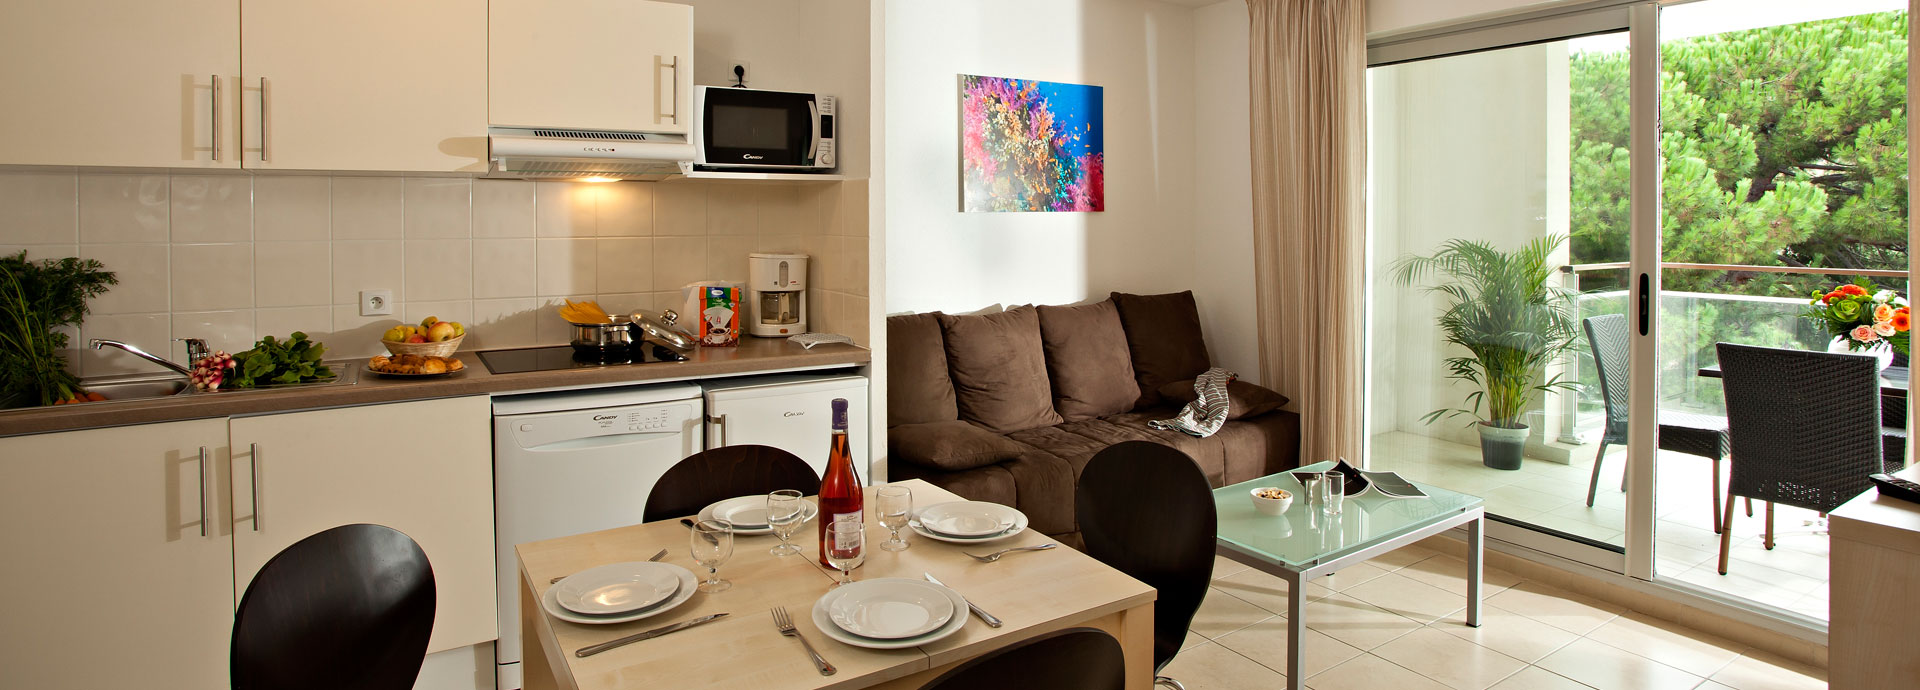 Holiday rental at Cagnes-sur-Mer on the French Riviera : Le Crystal residence